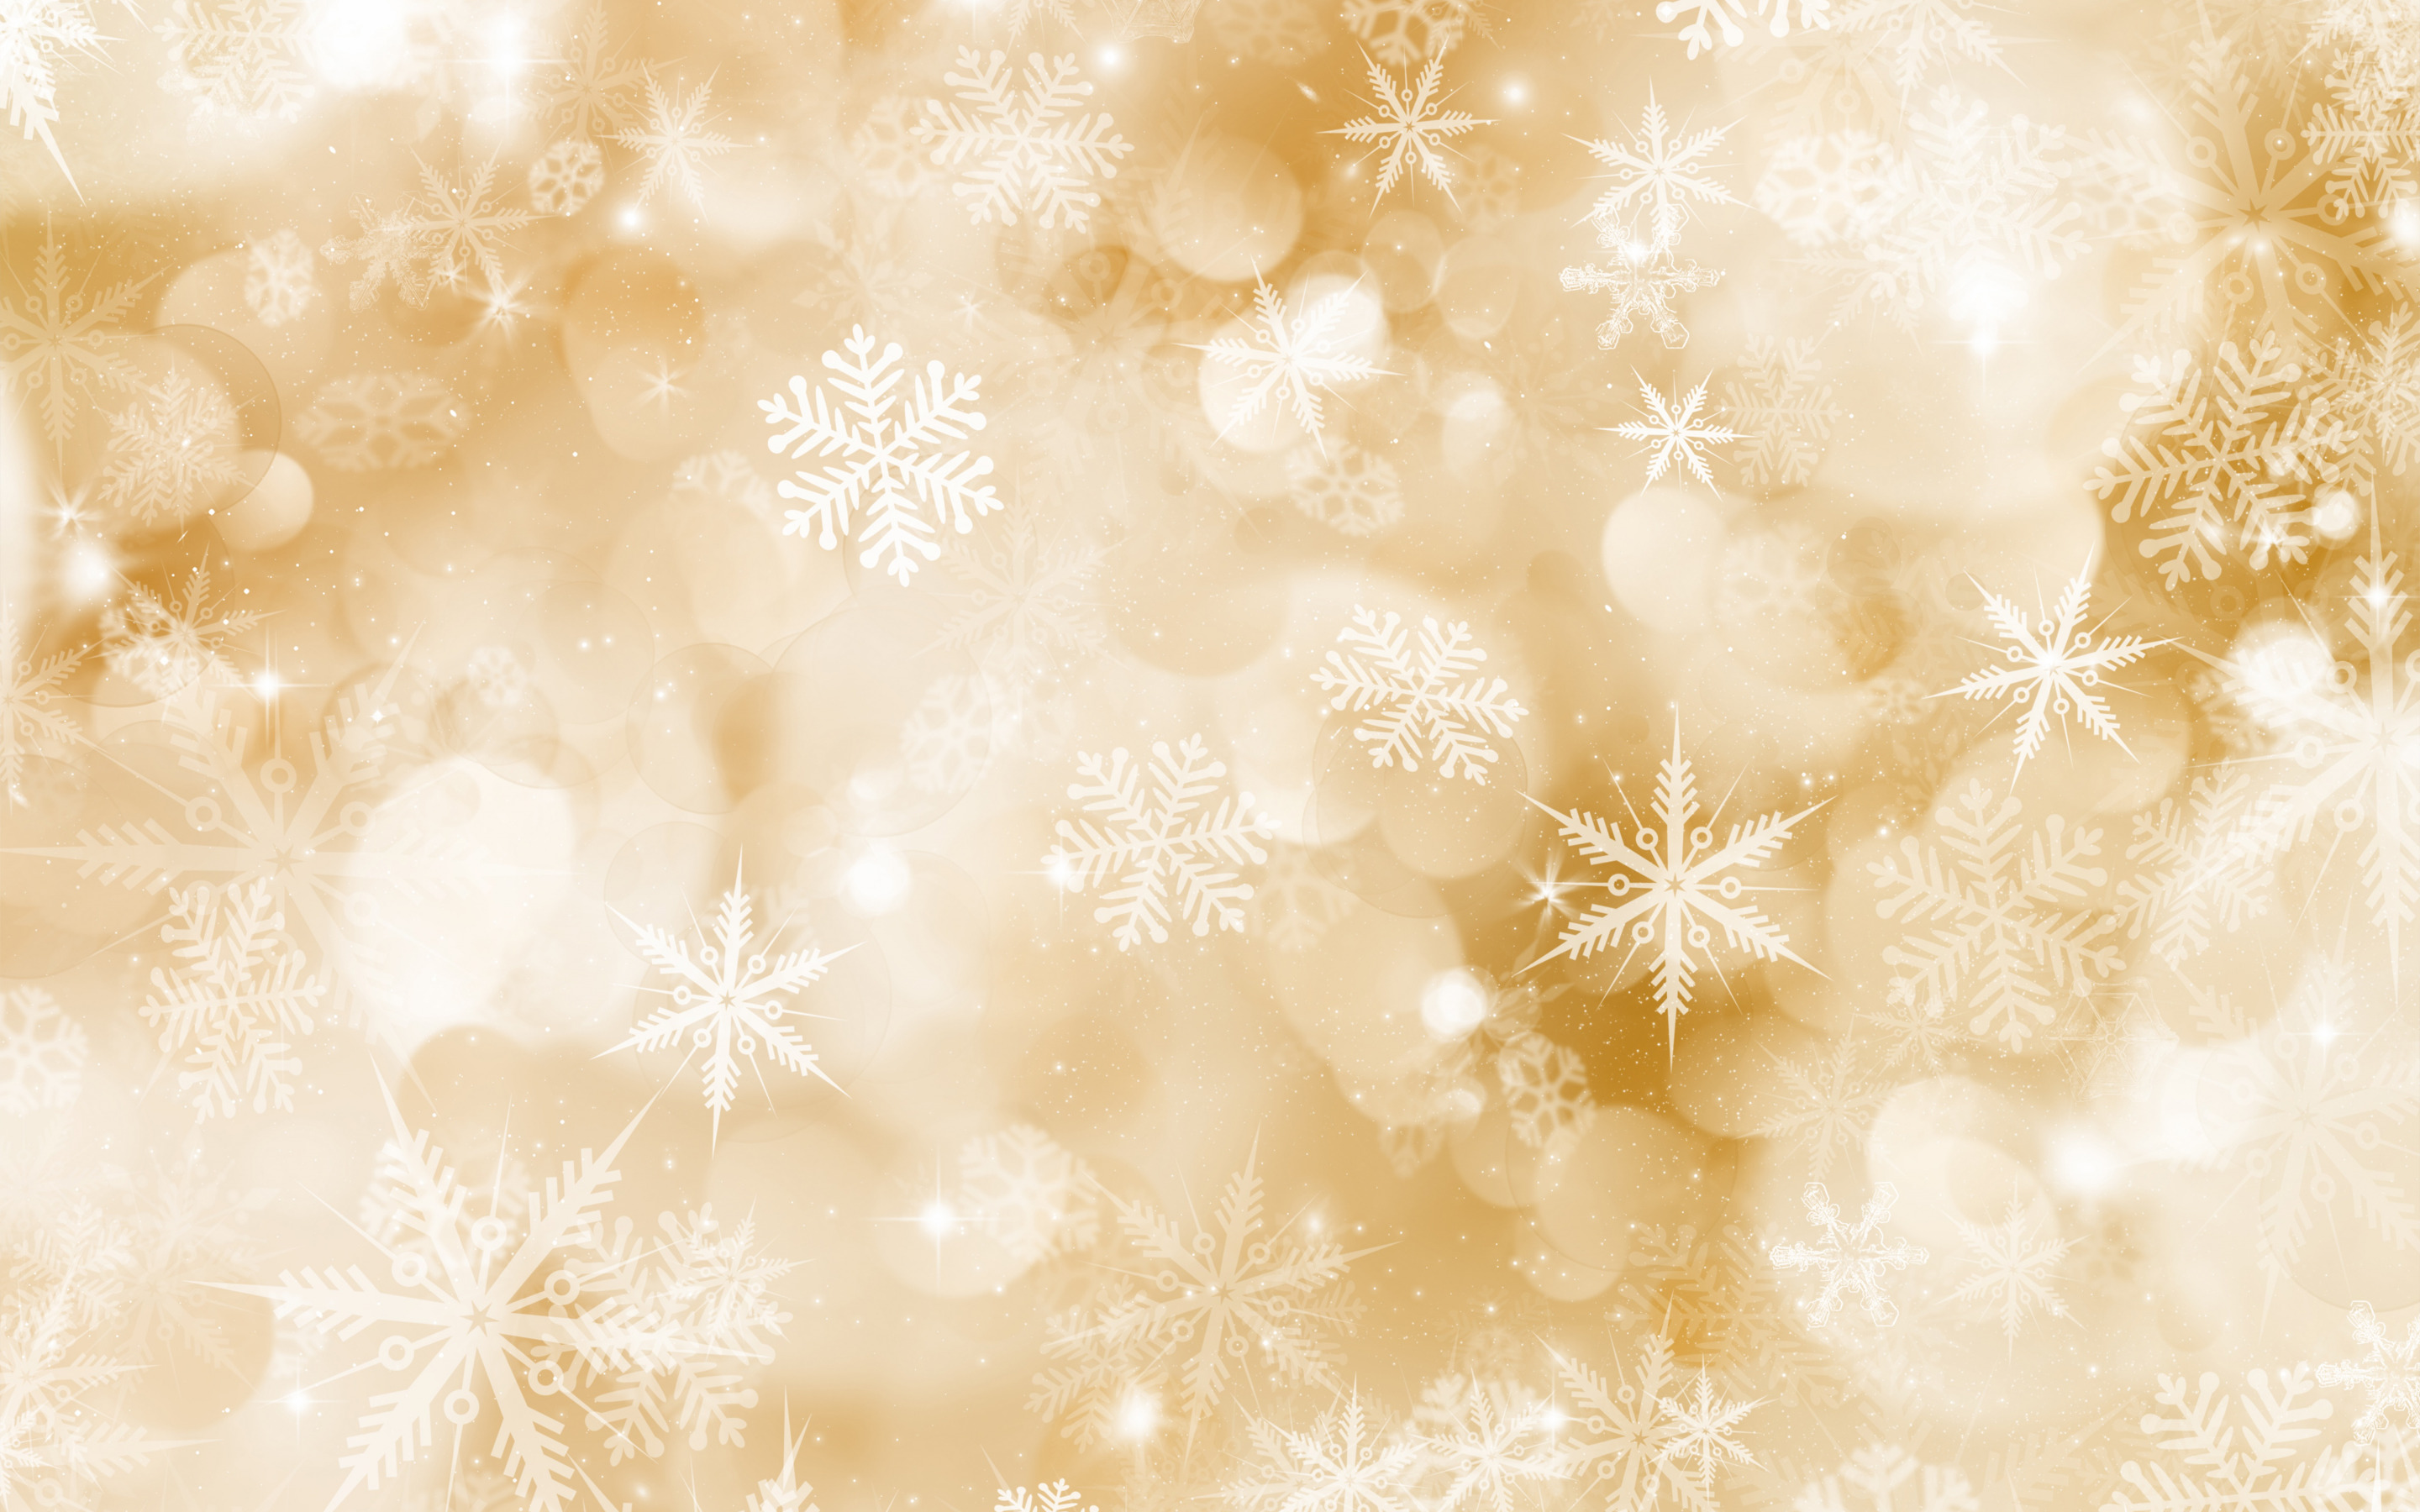 Download wallpaper Gold winter texture, winter background, texture with snowflakes, winter glitter texture, golden snowflakes, Christmas texture for desktop with resolution 2880x1800. High Quality HD picture wallpaper